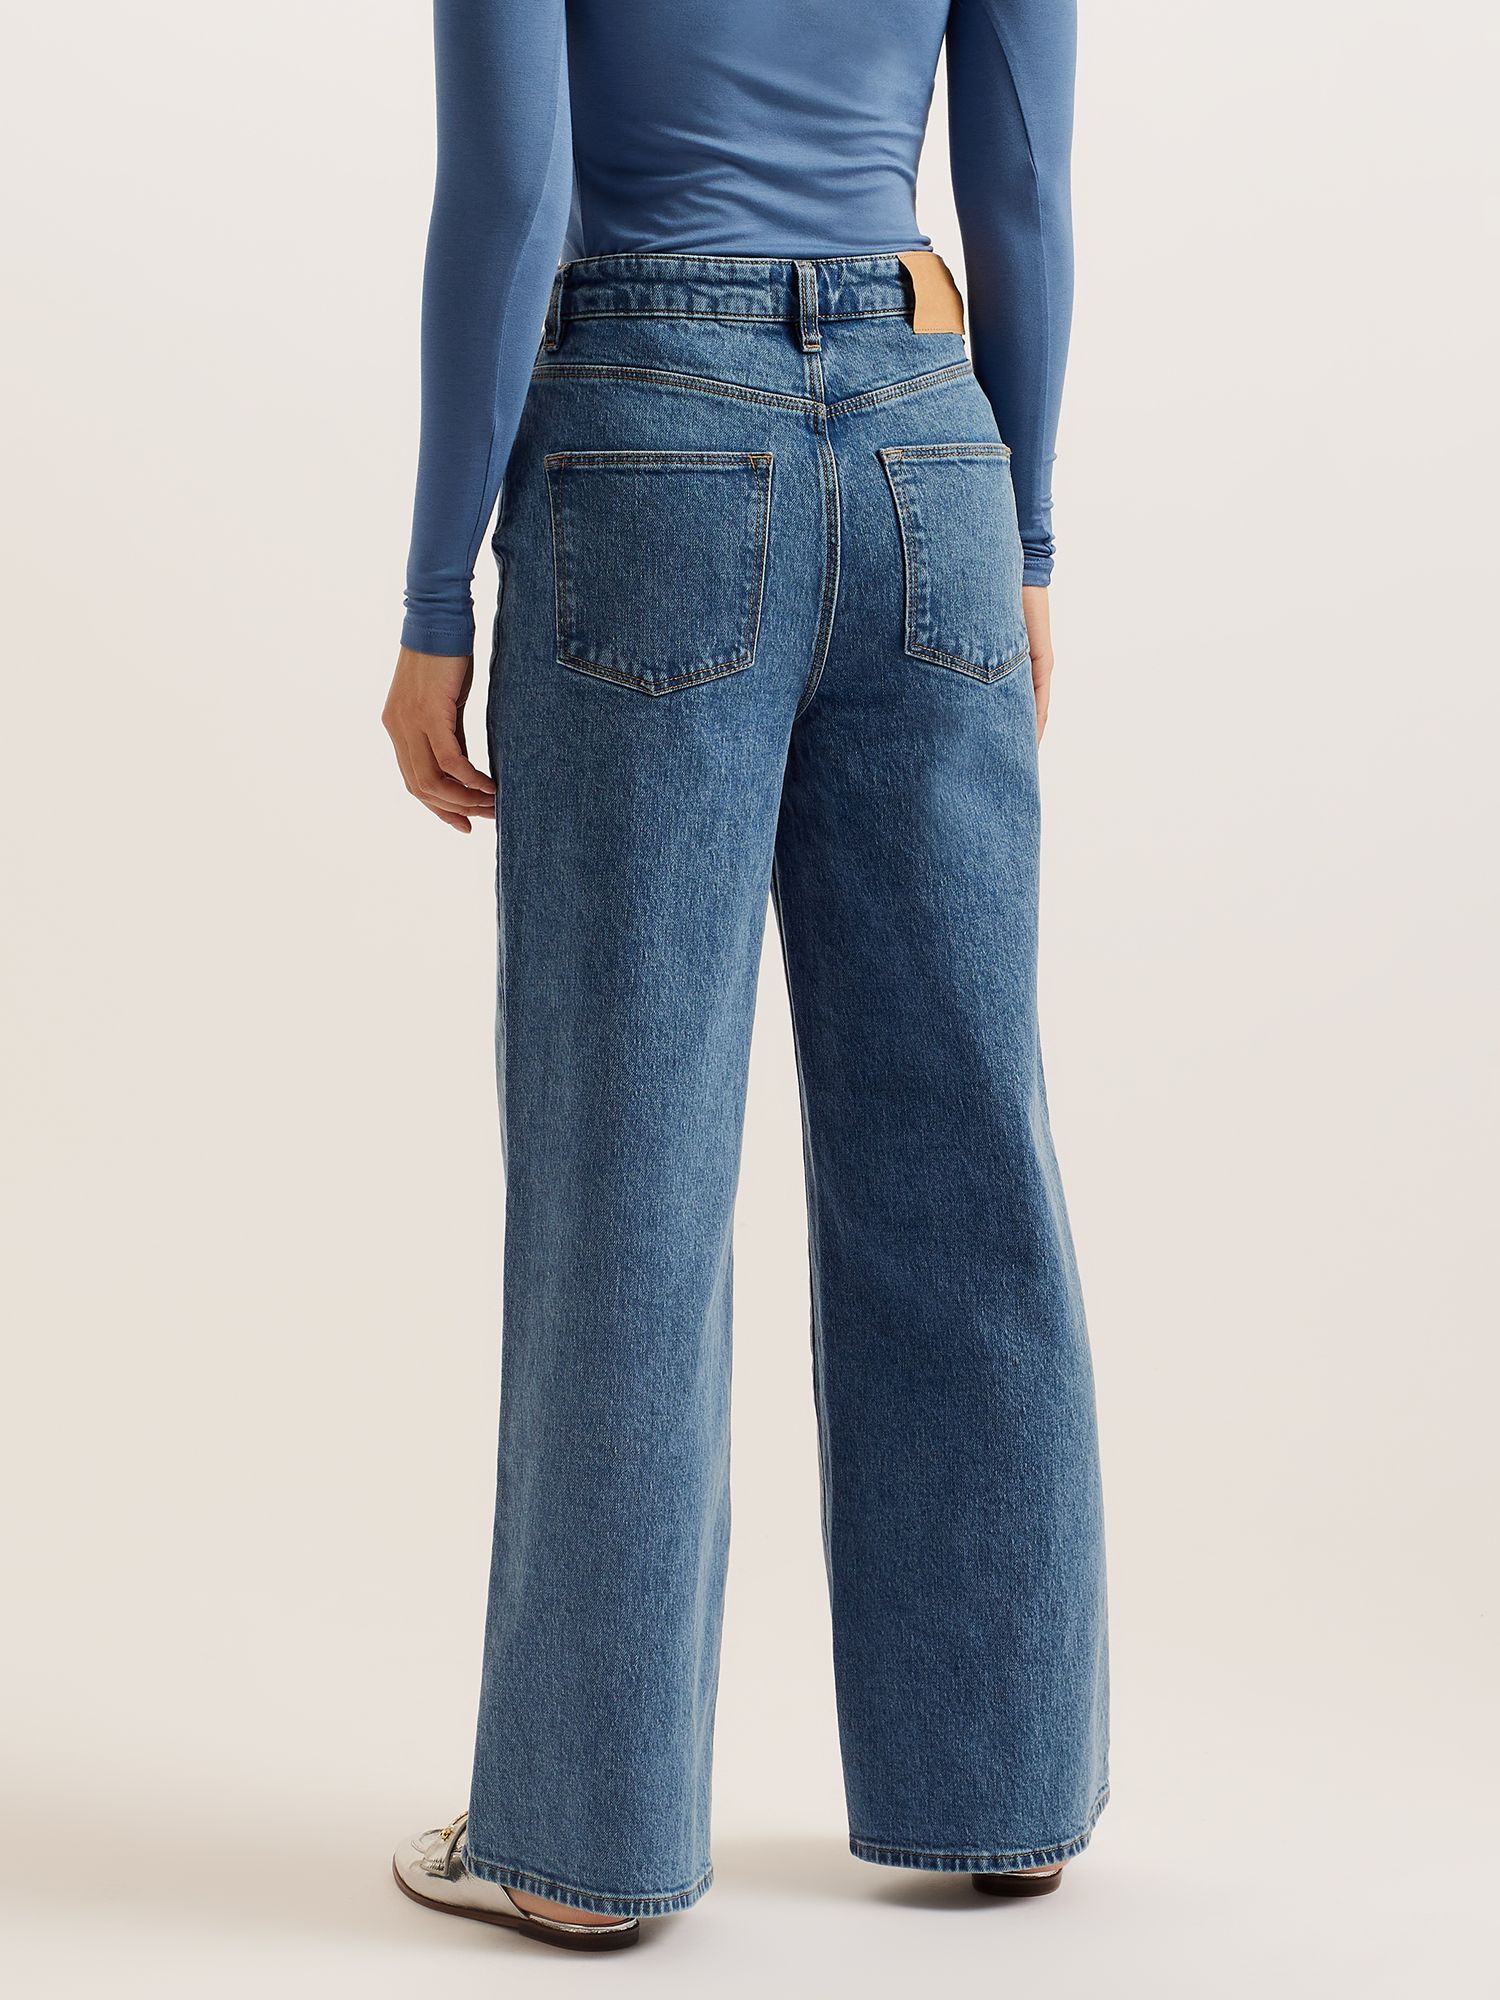 Ted Baker Nass Wide Leg Jeans, Mid Blue, 25R